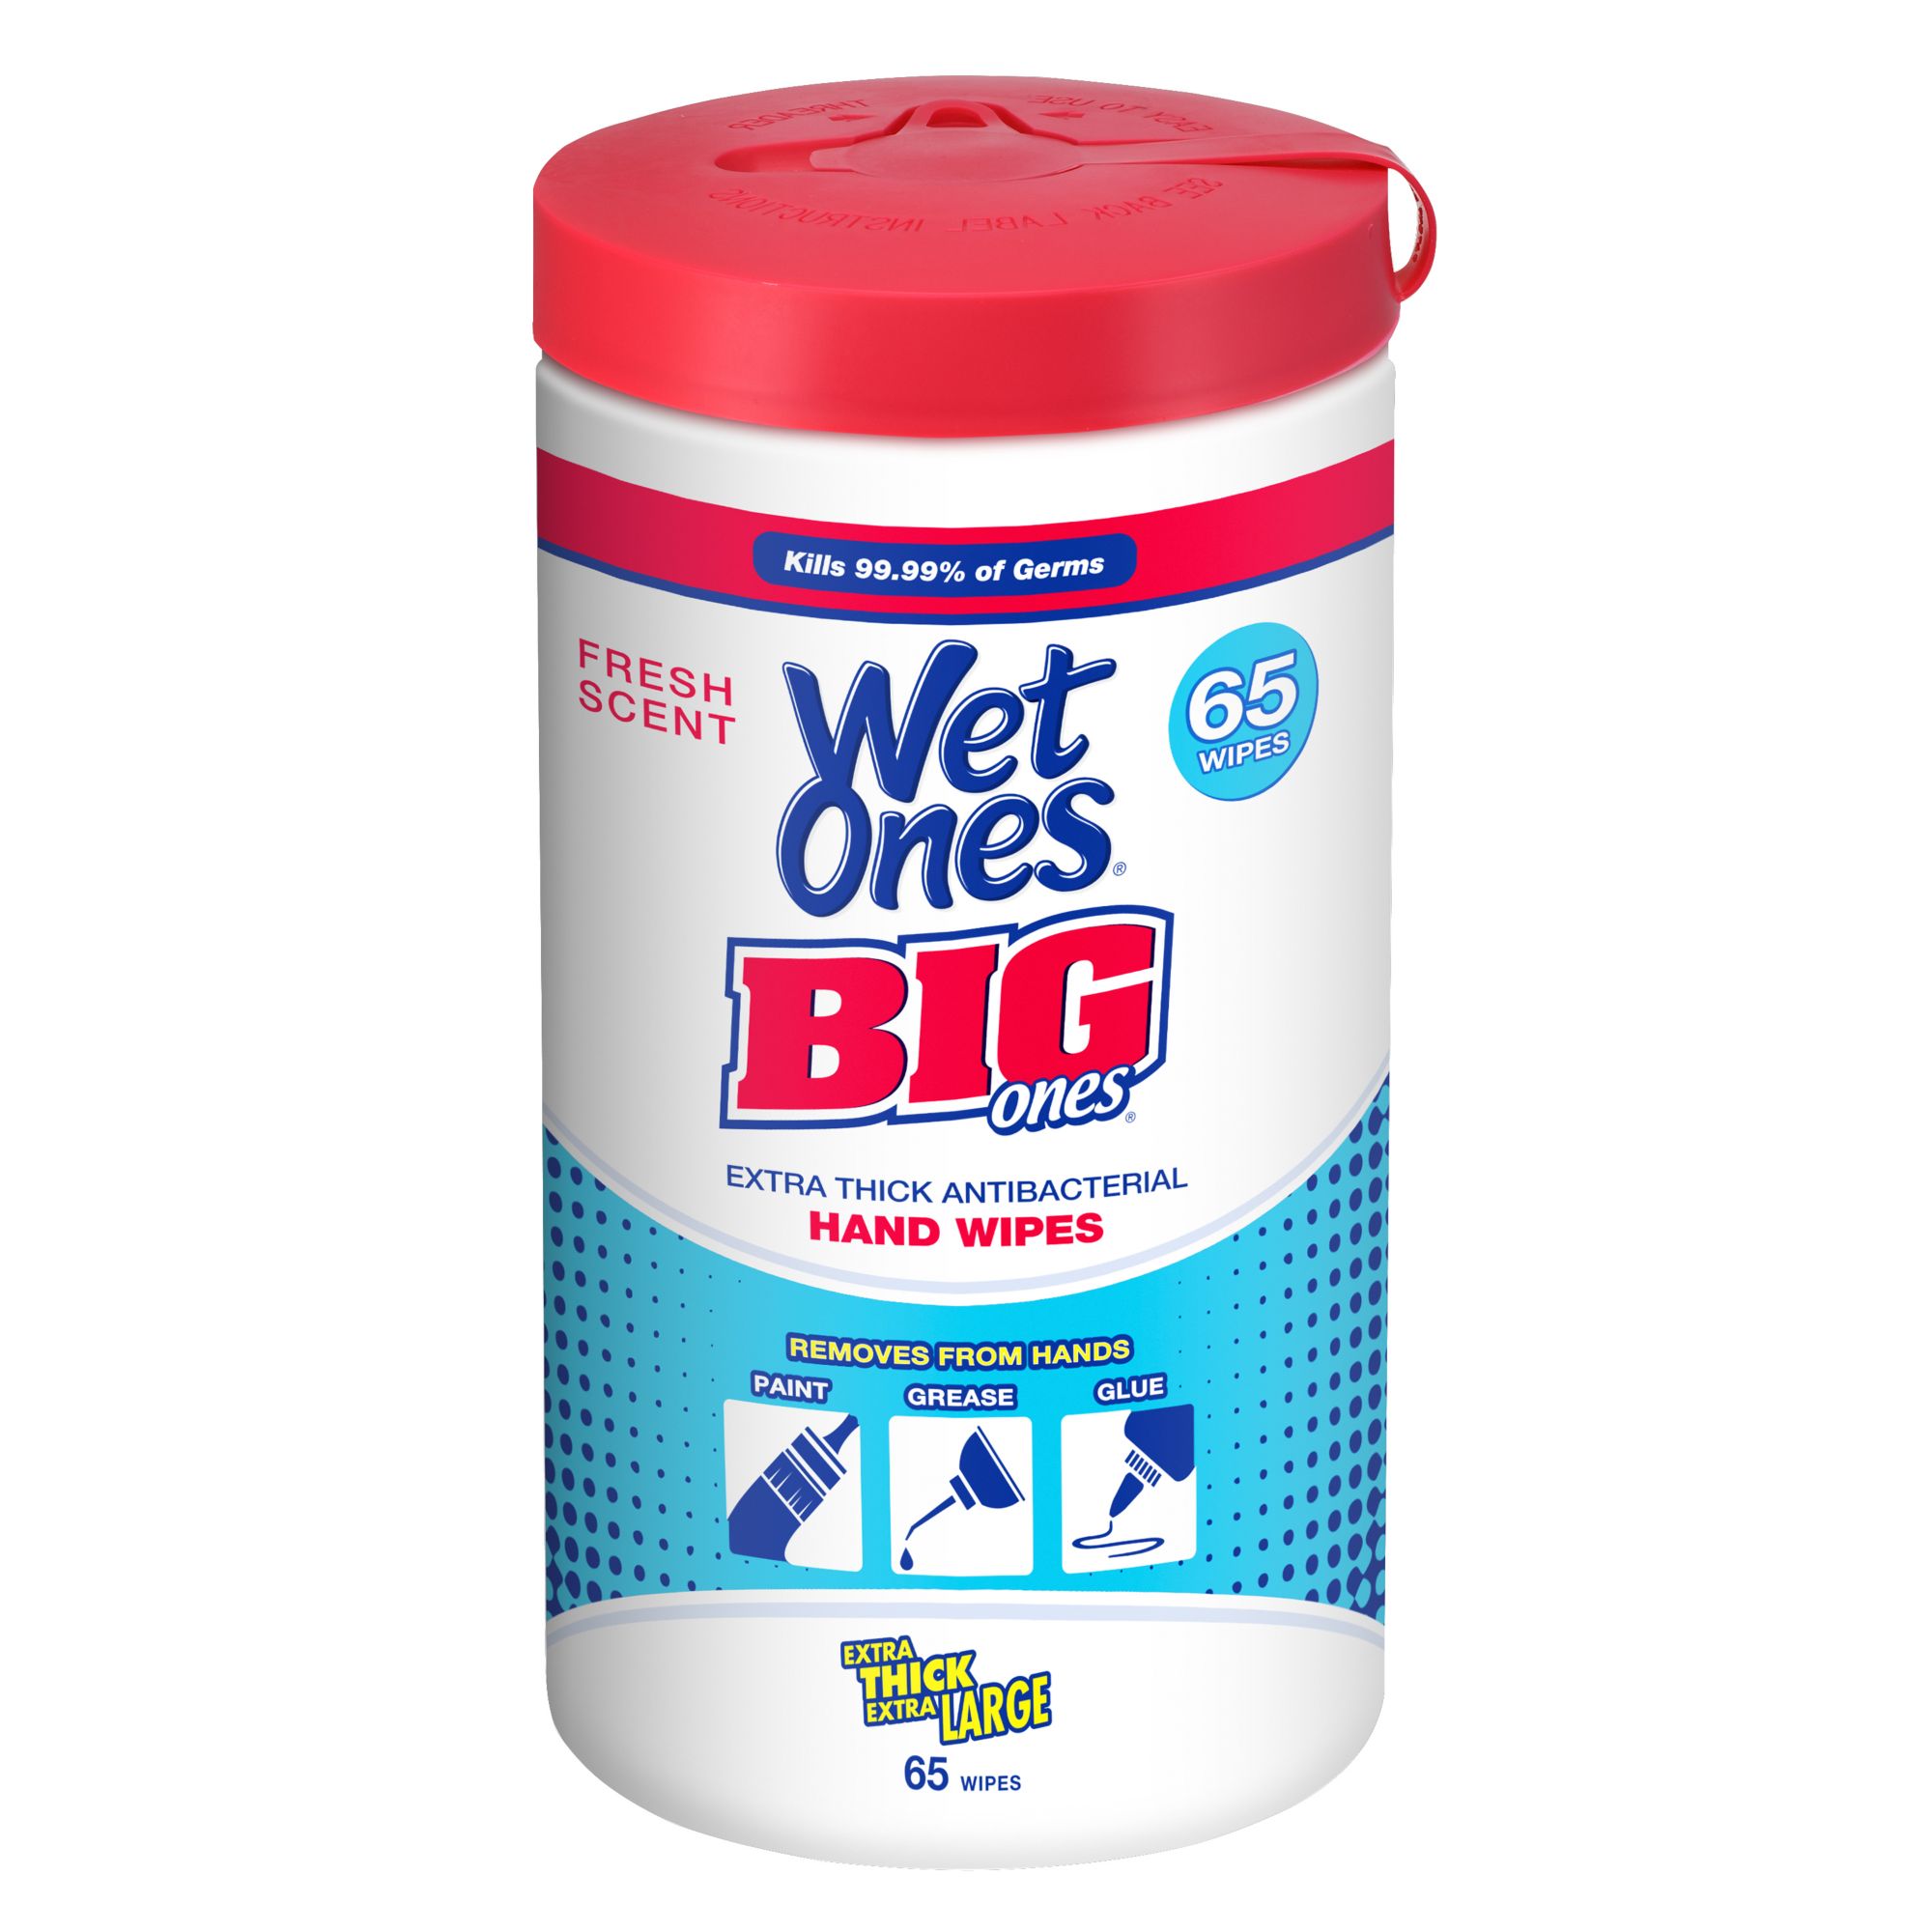 Wet Ones Fresh Scent Antibacterial Hand Cleaning Wipes Canister (40-Count)  Wet